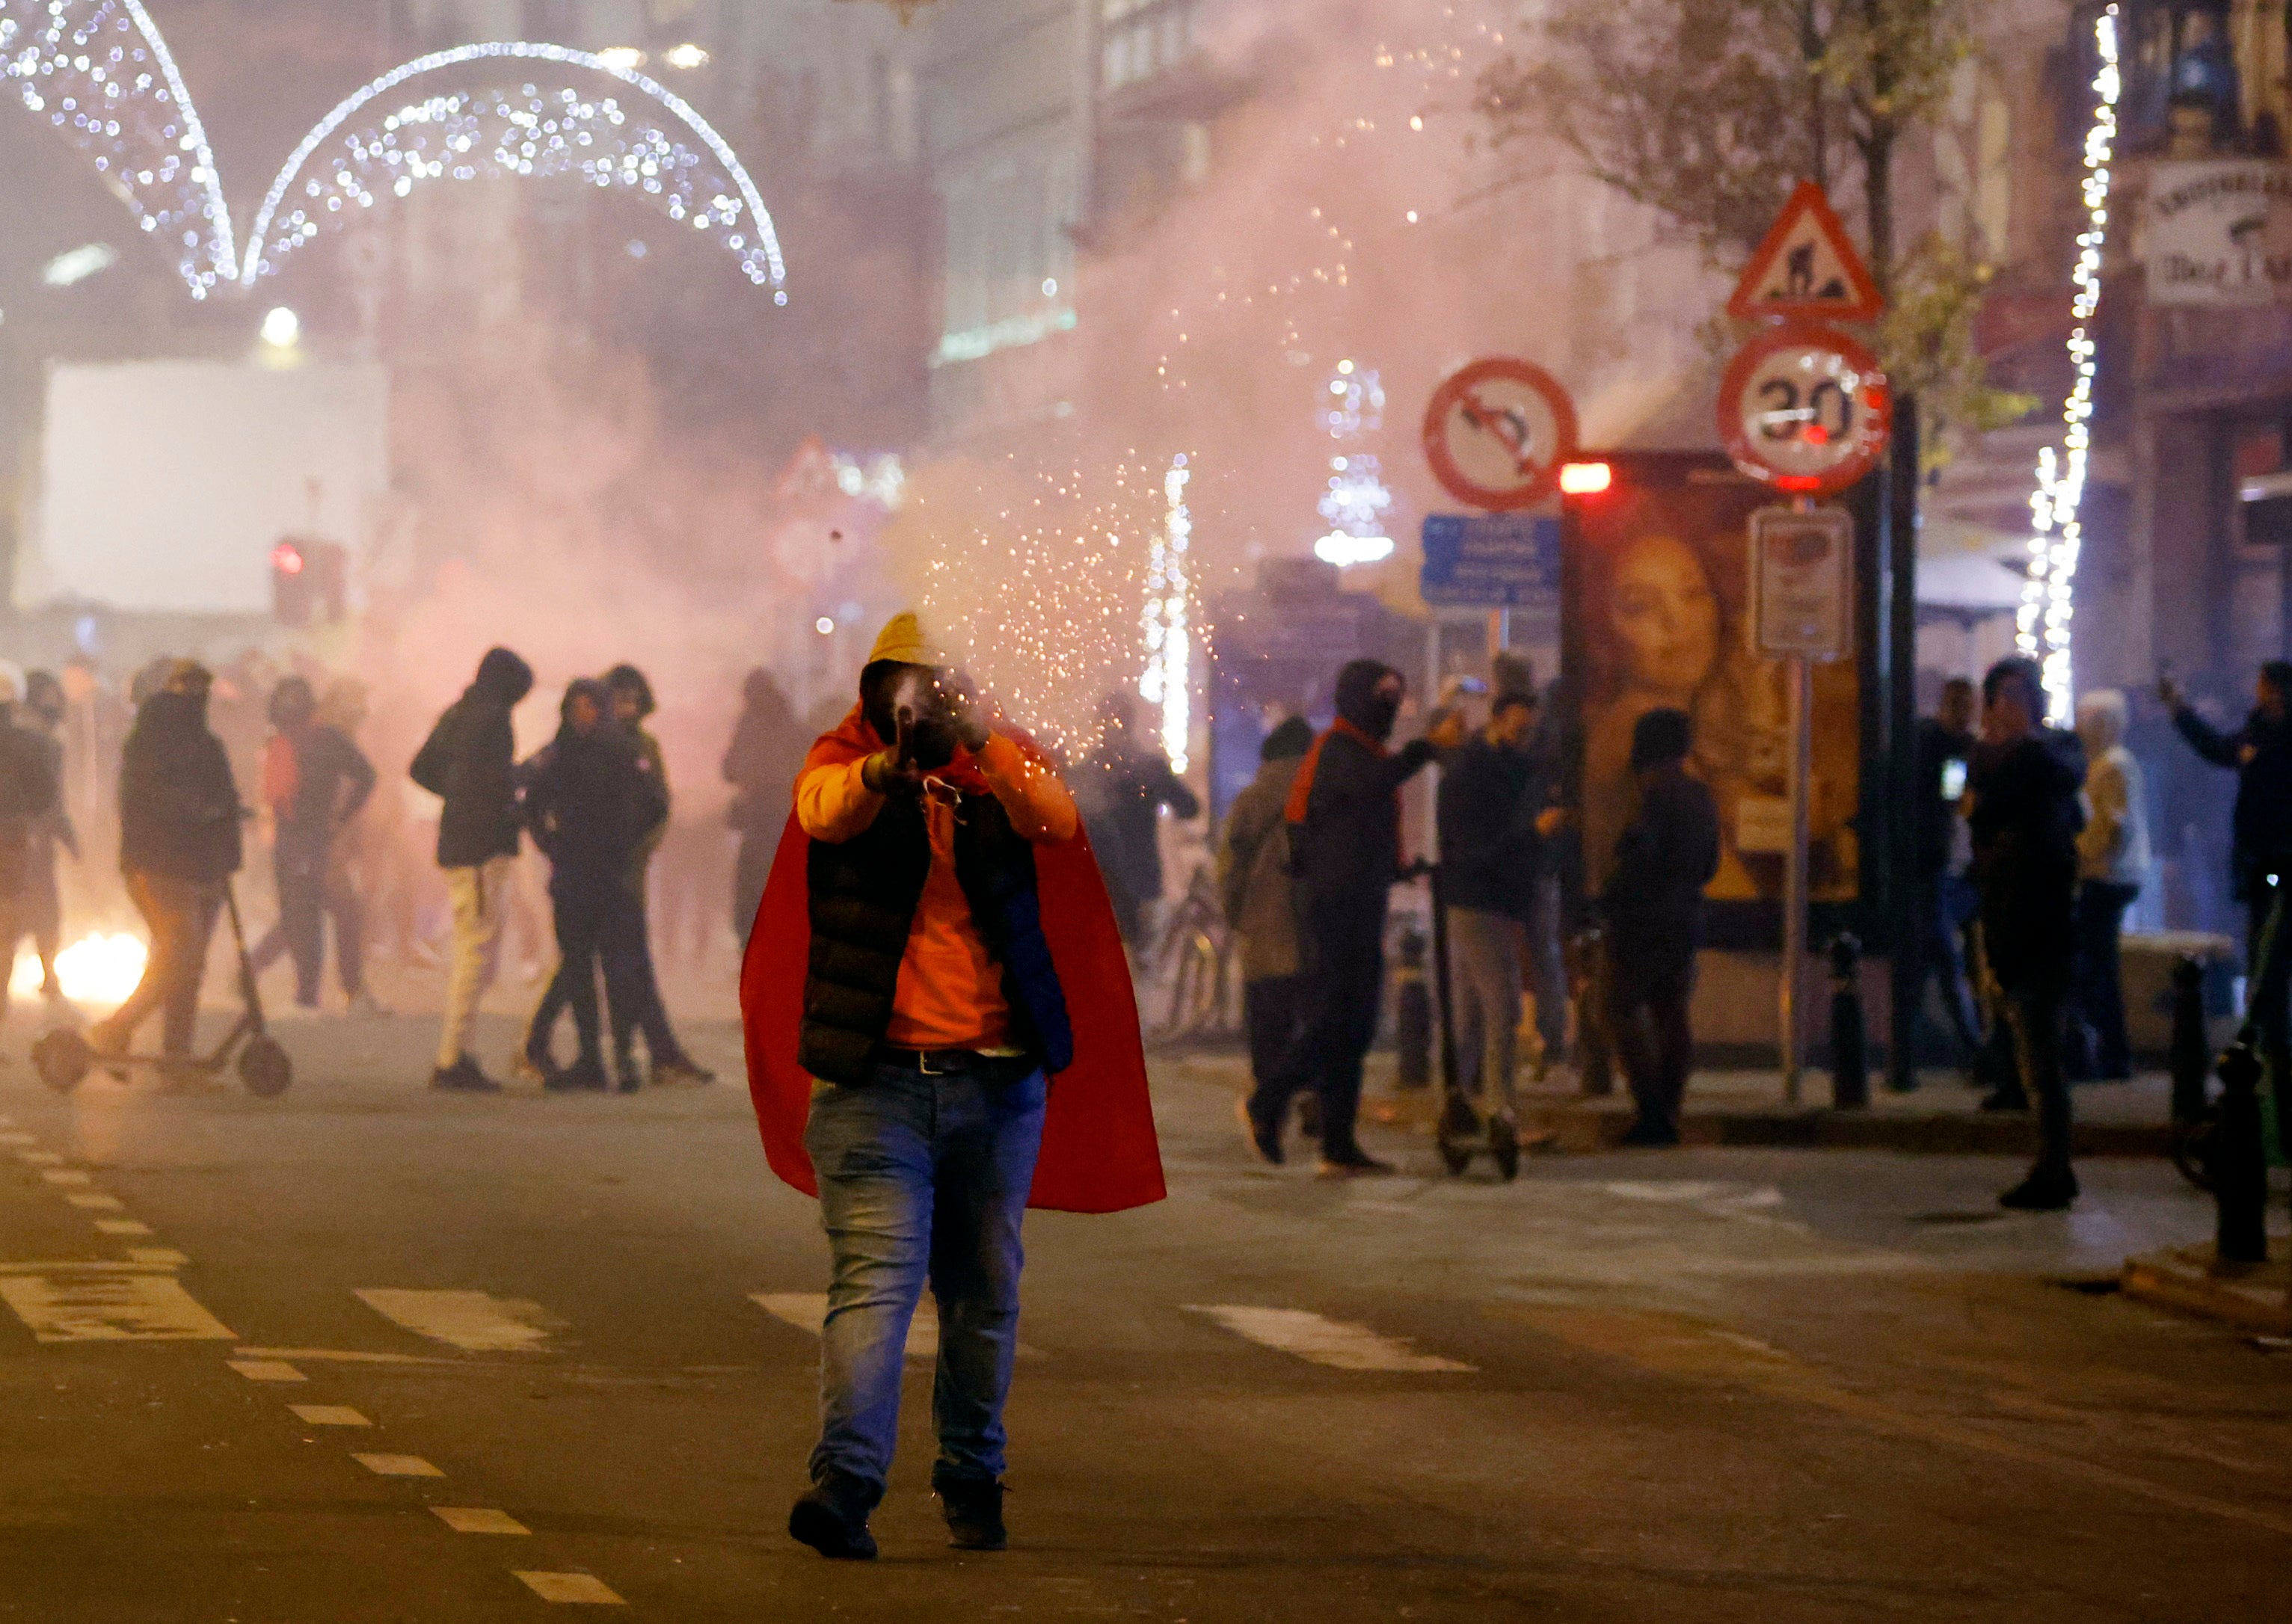 A Morocco fan is pictured with a flare in Brussels after the match